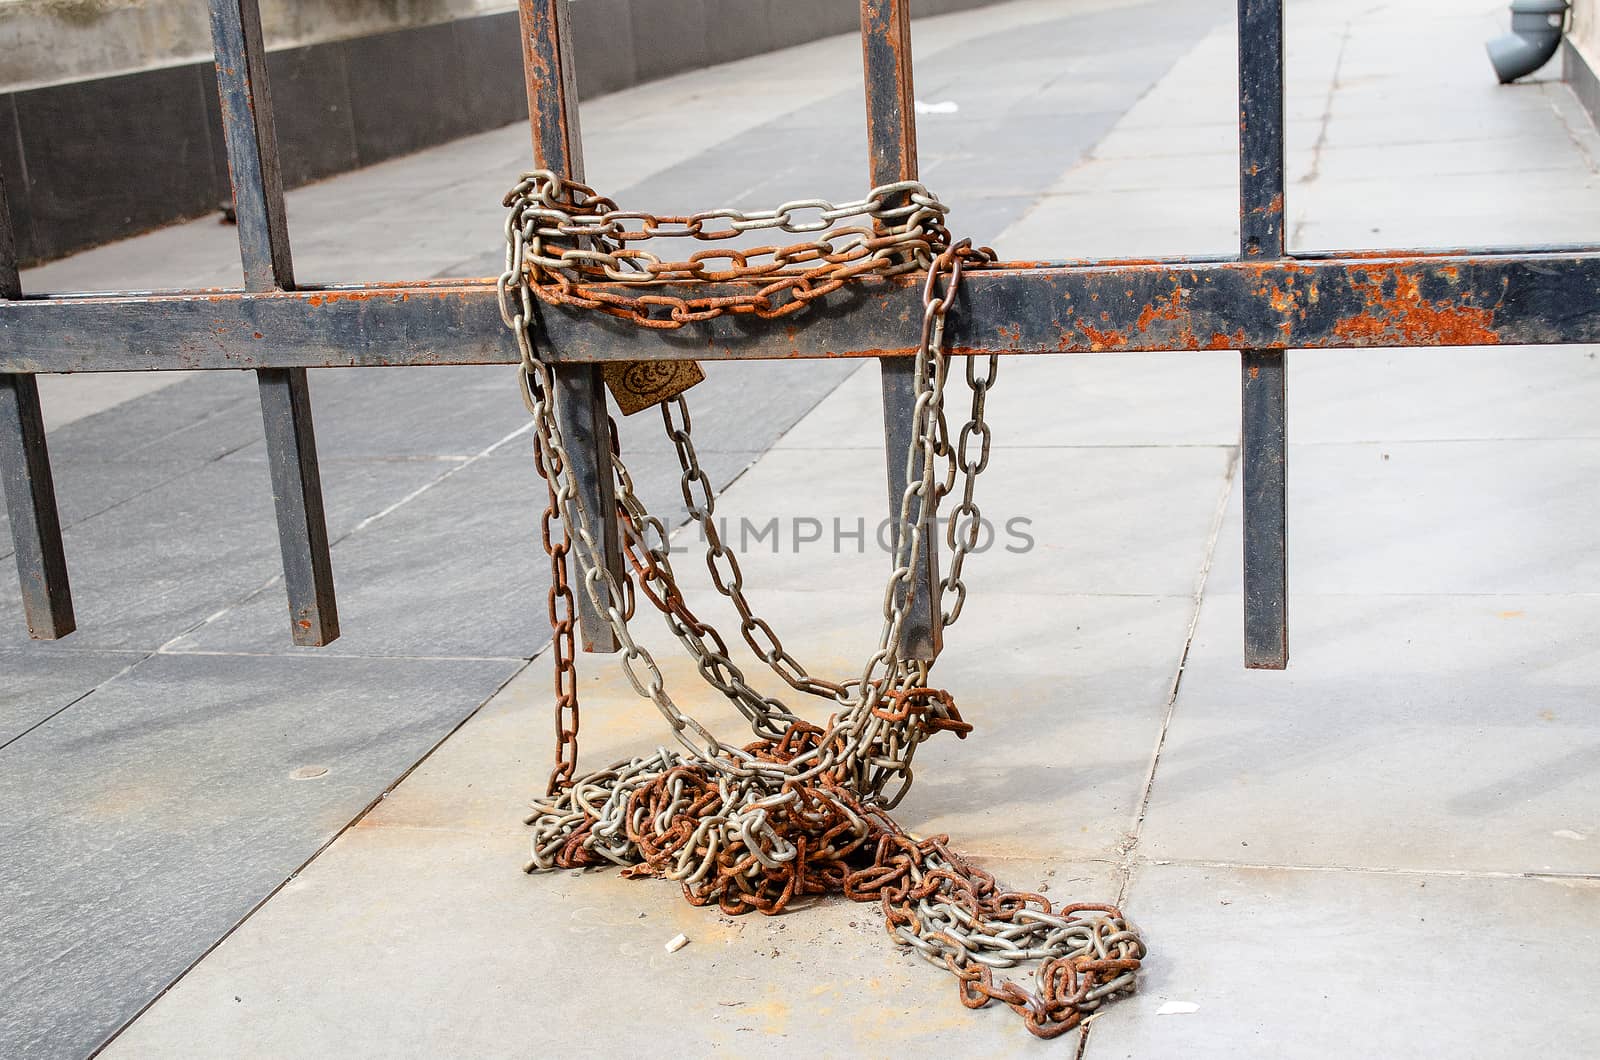 Rusty fence and chain on the bulgarian street